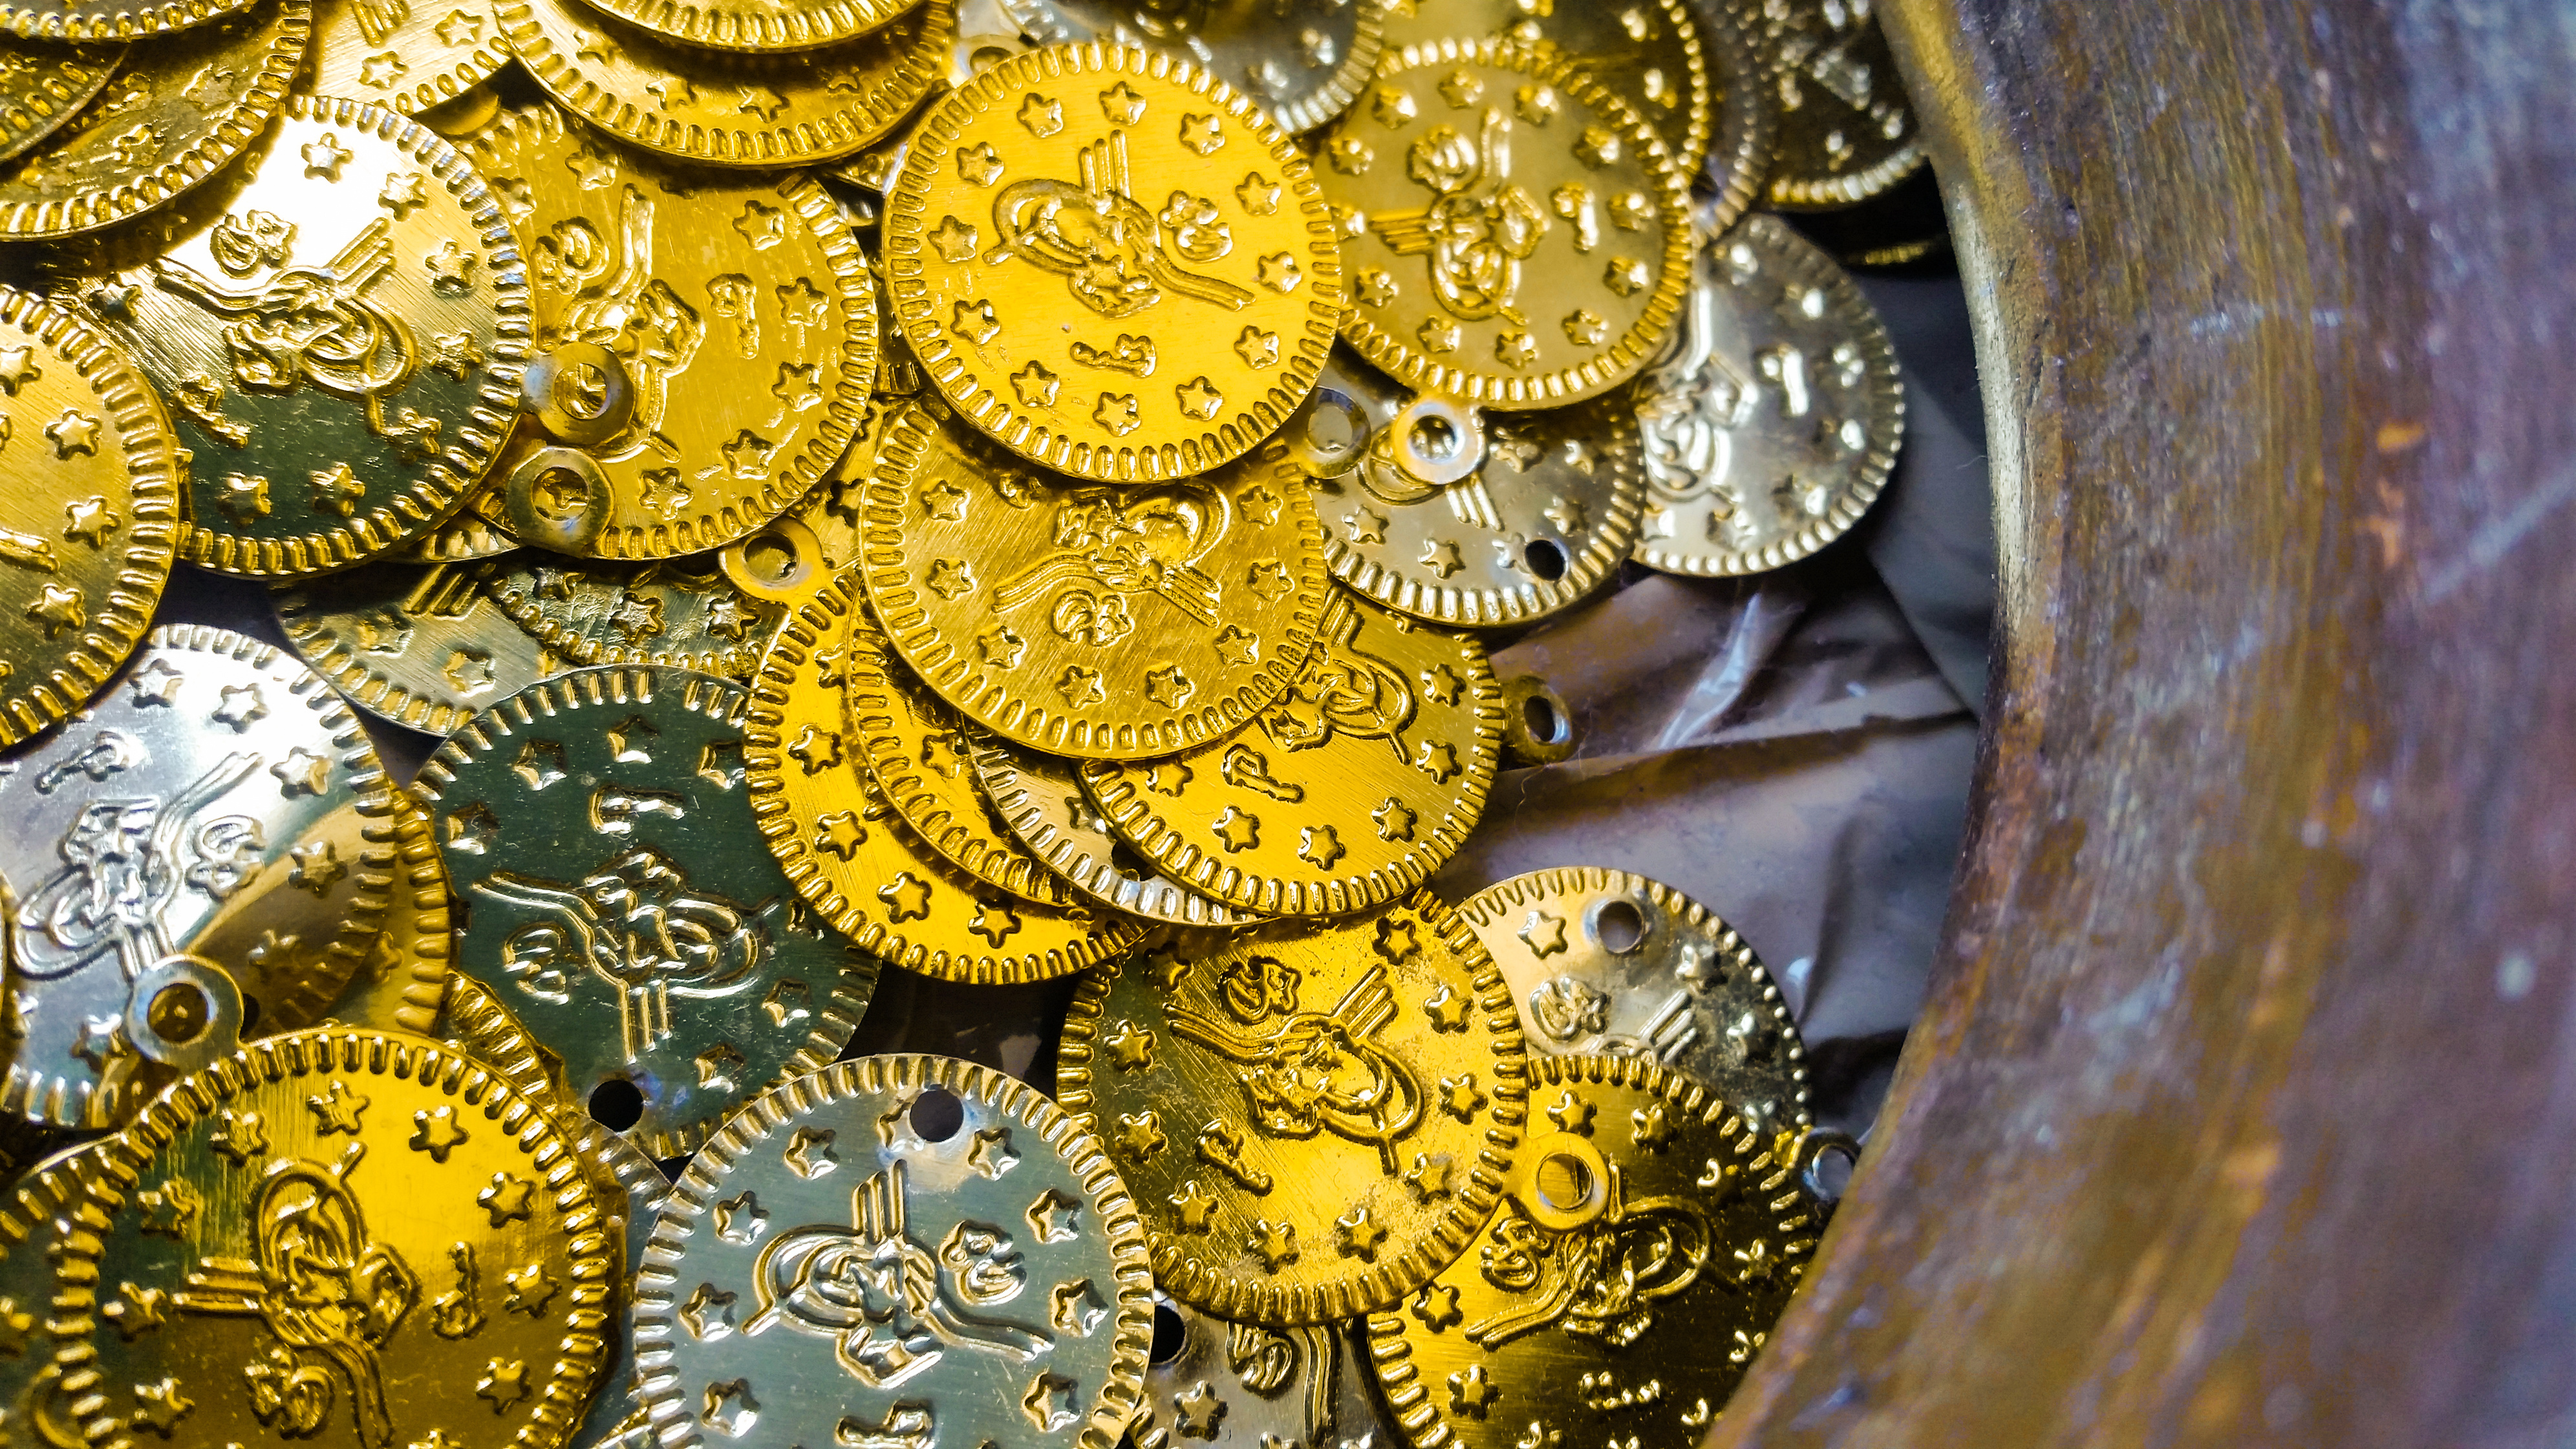 Antique Coin Buyers: Tips on Buying Old Coins